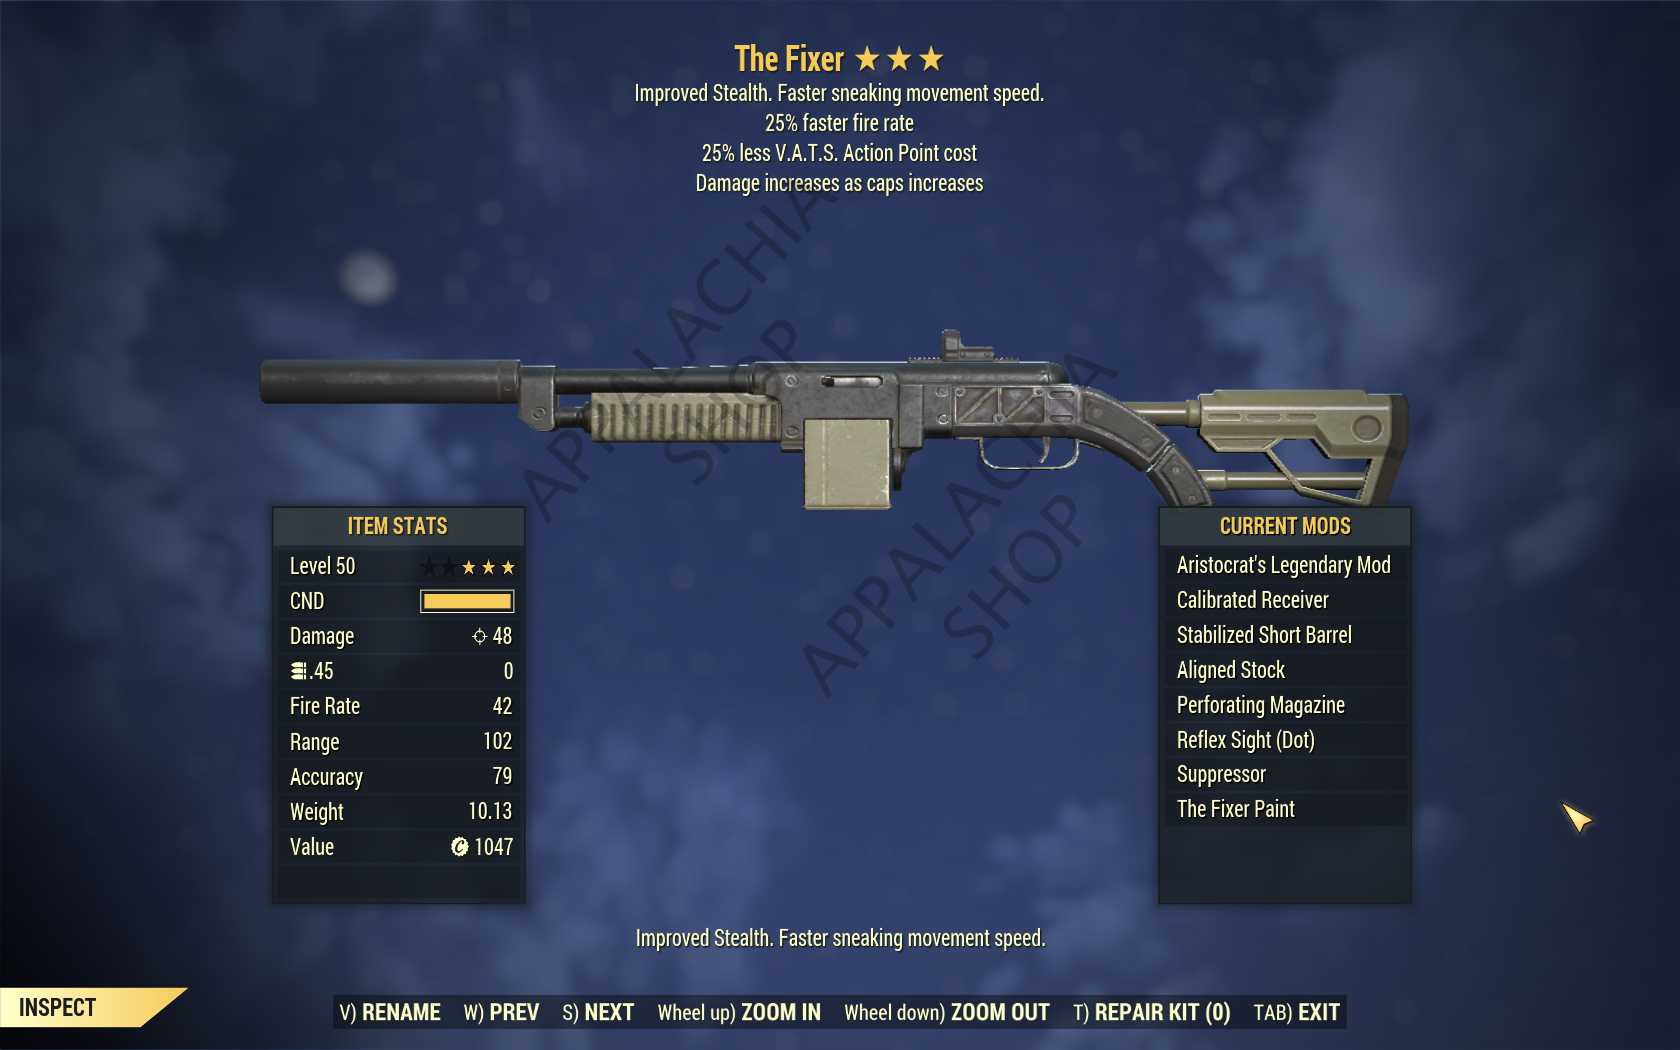 Aristocrat's The Fixer (25% faster fire rate, 25% less VATS AP cost)